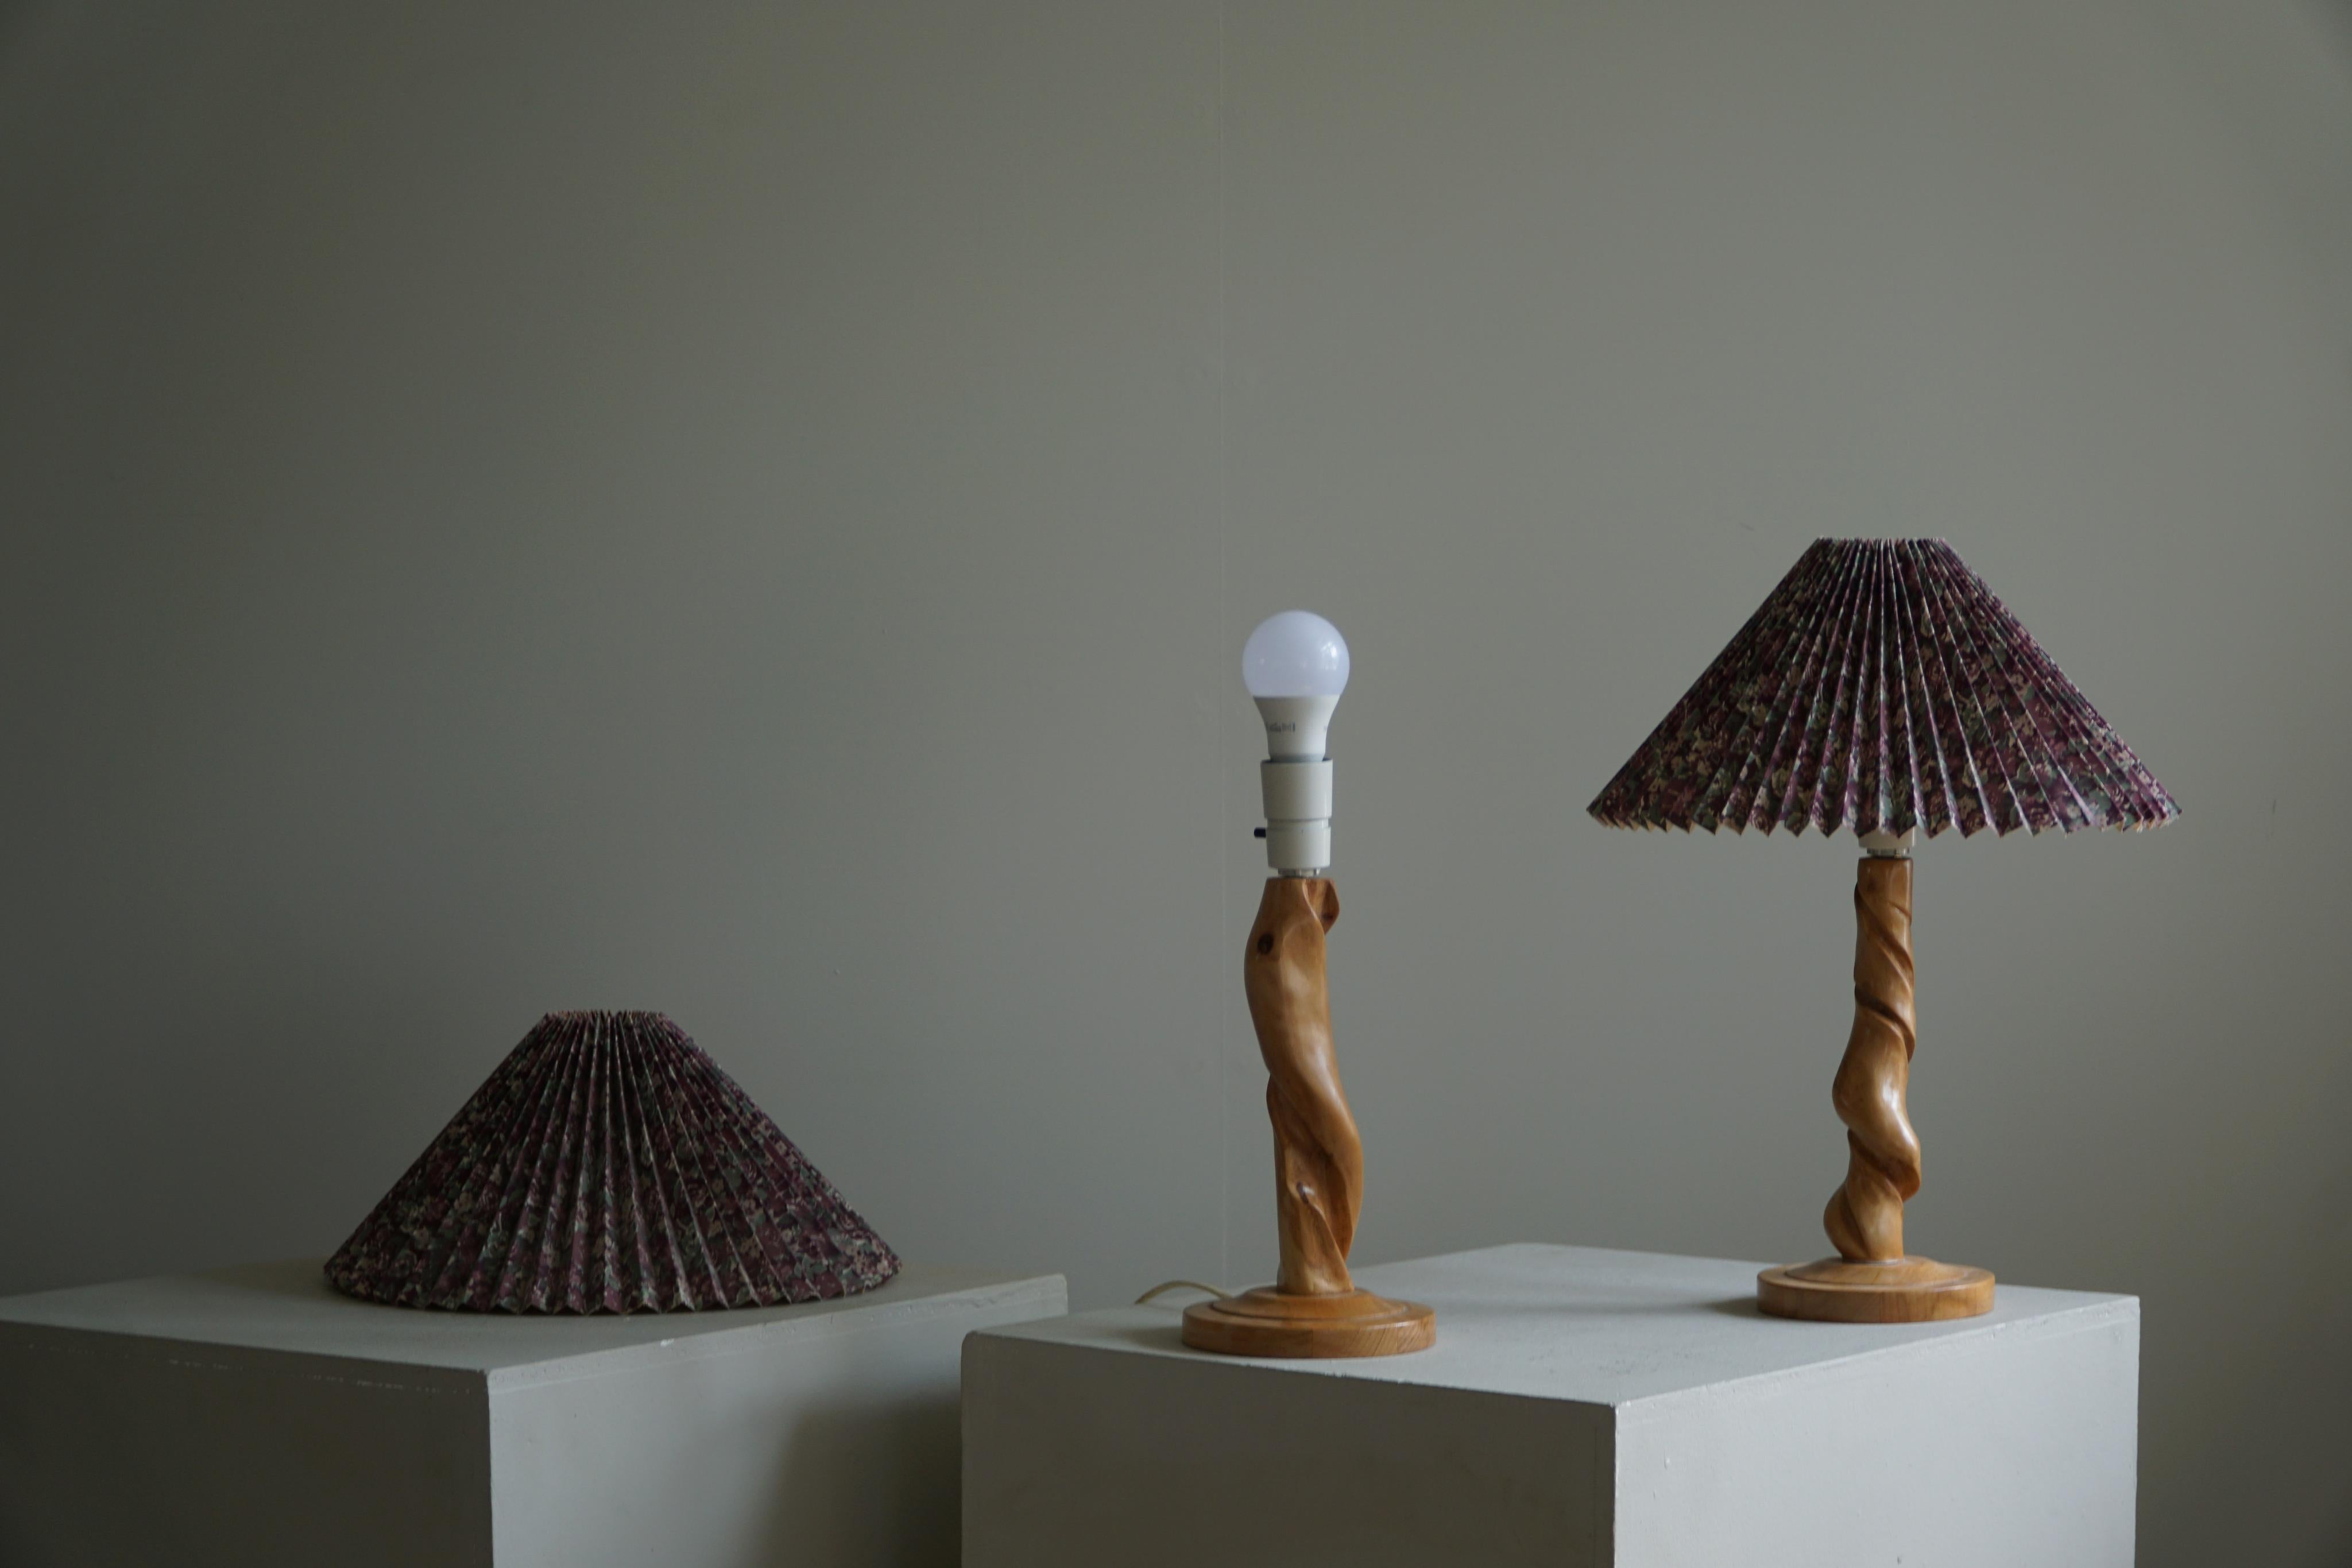 Hand-Crafted Pair of Sculptural Organic Wooden Table Lamps, Scandinavian Modern, 1970s For Sale